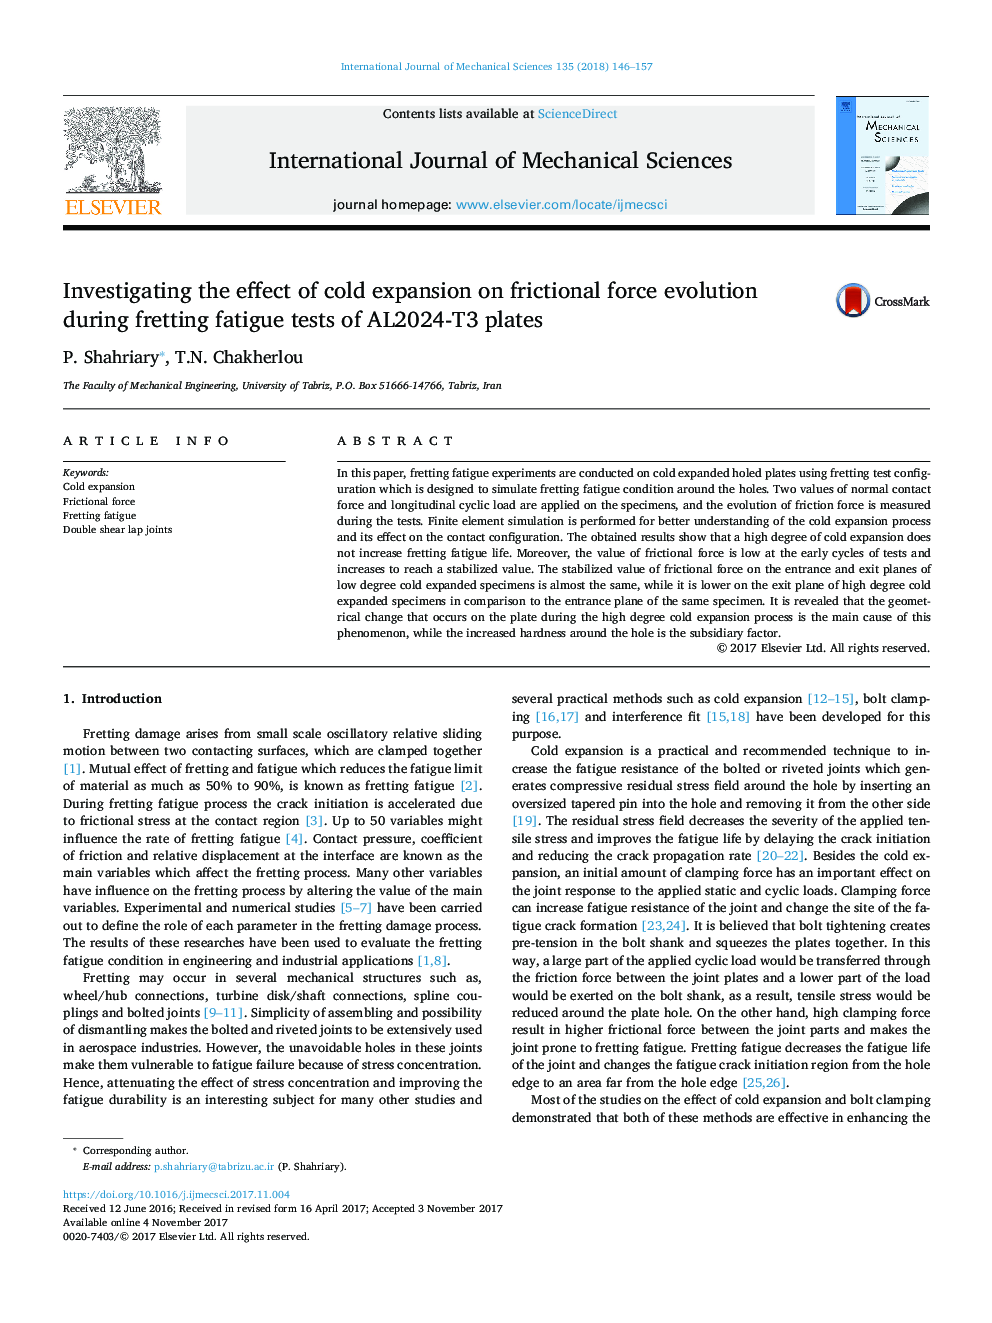 Investigating the effect of cold expansion on frictional force evolution during fretting fatigue tests of AL2024-T3 plates